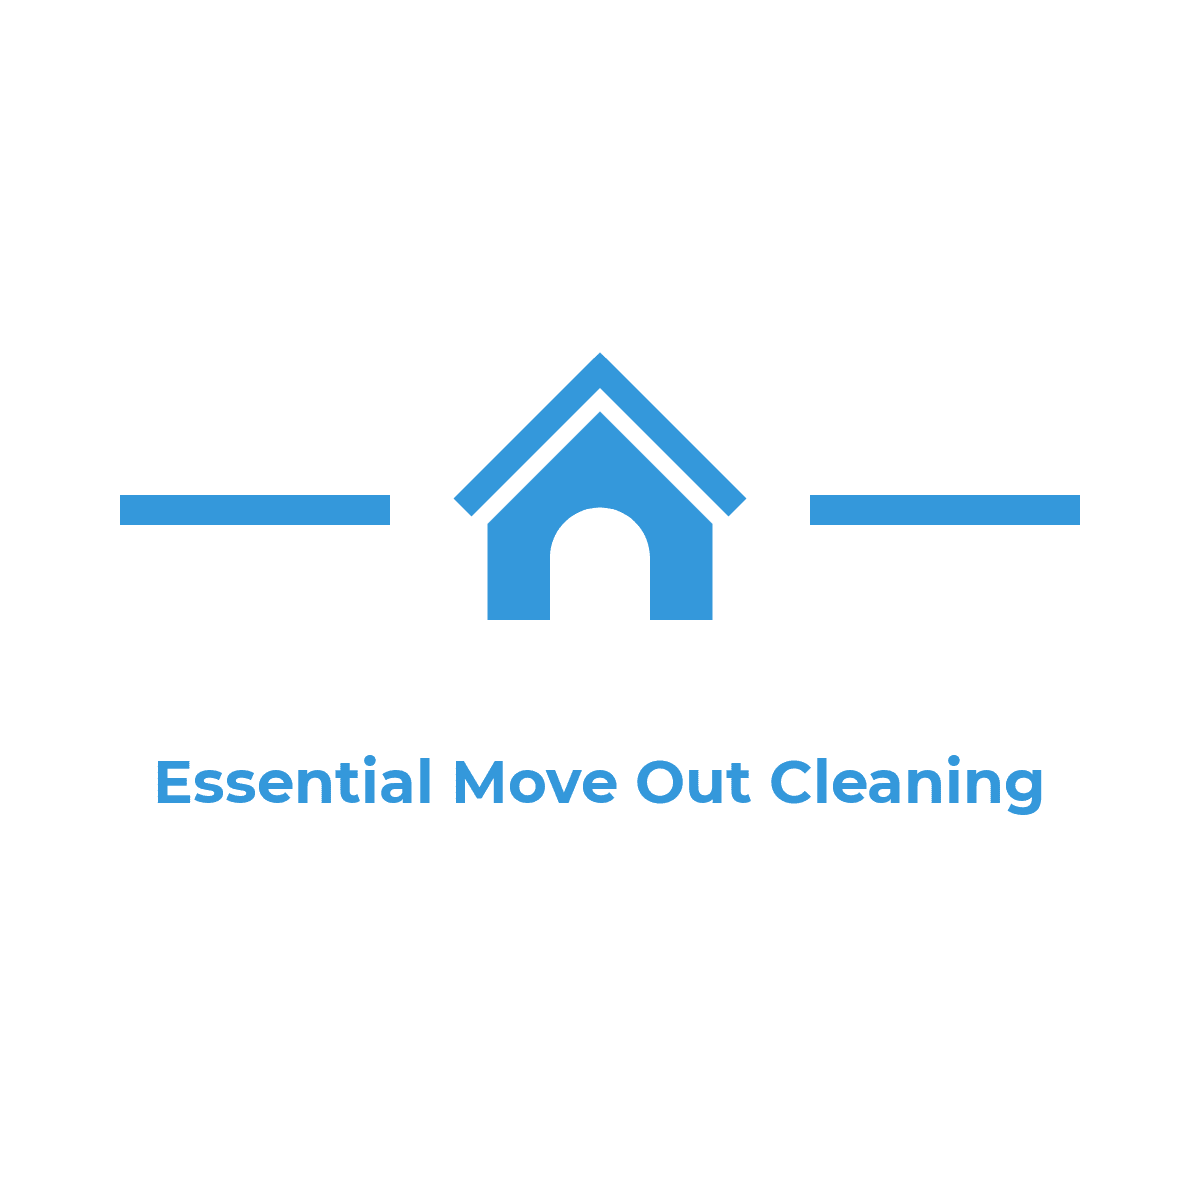 Essential Move Out Cleaning